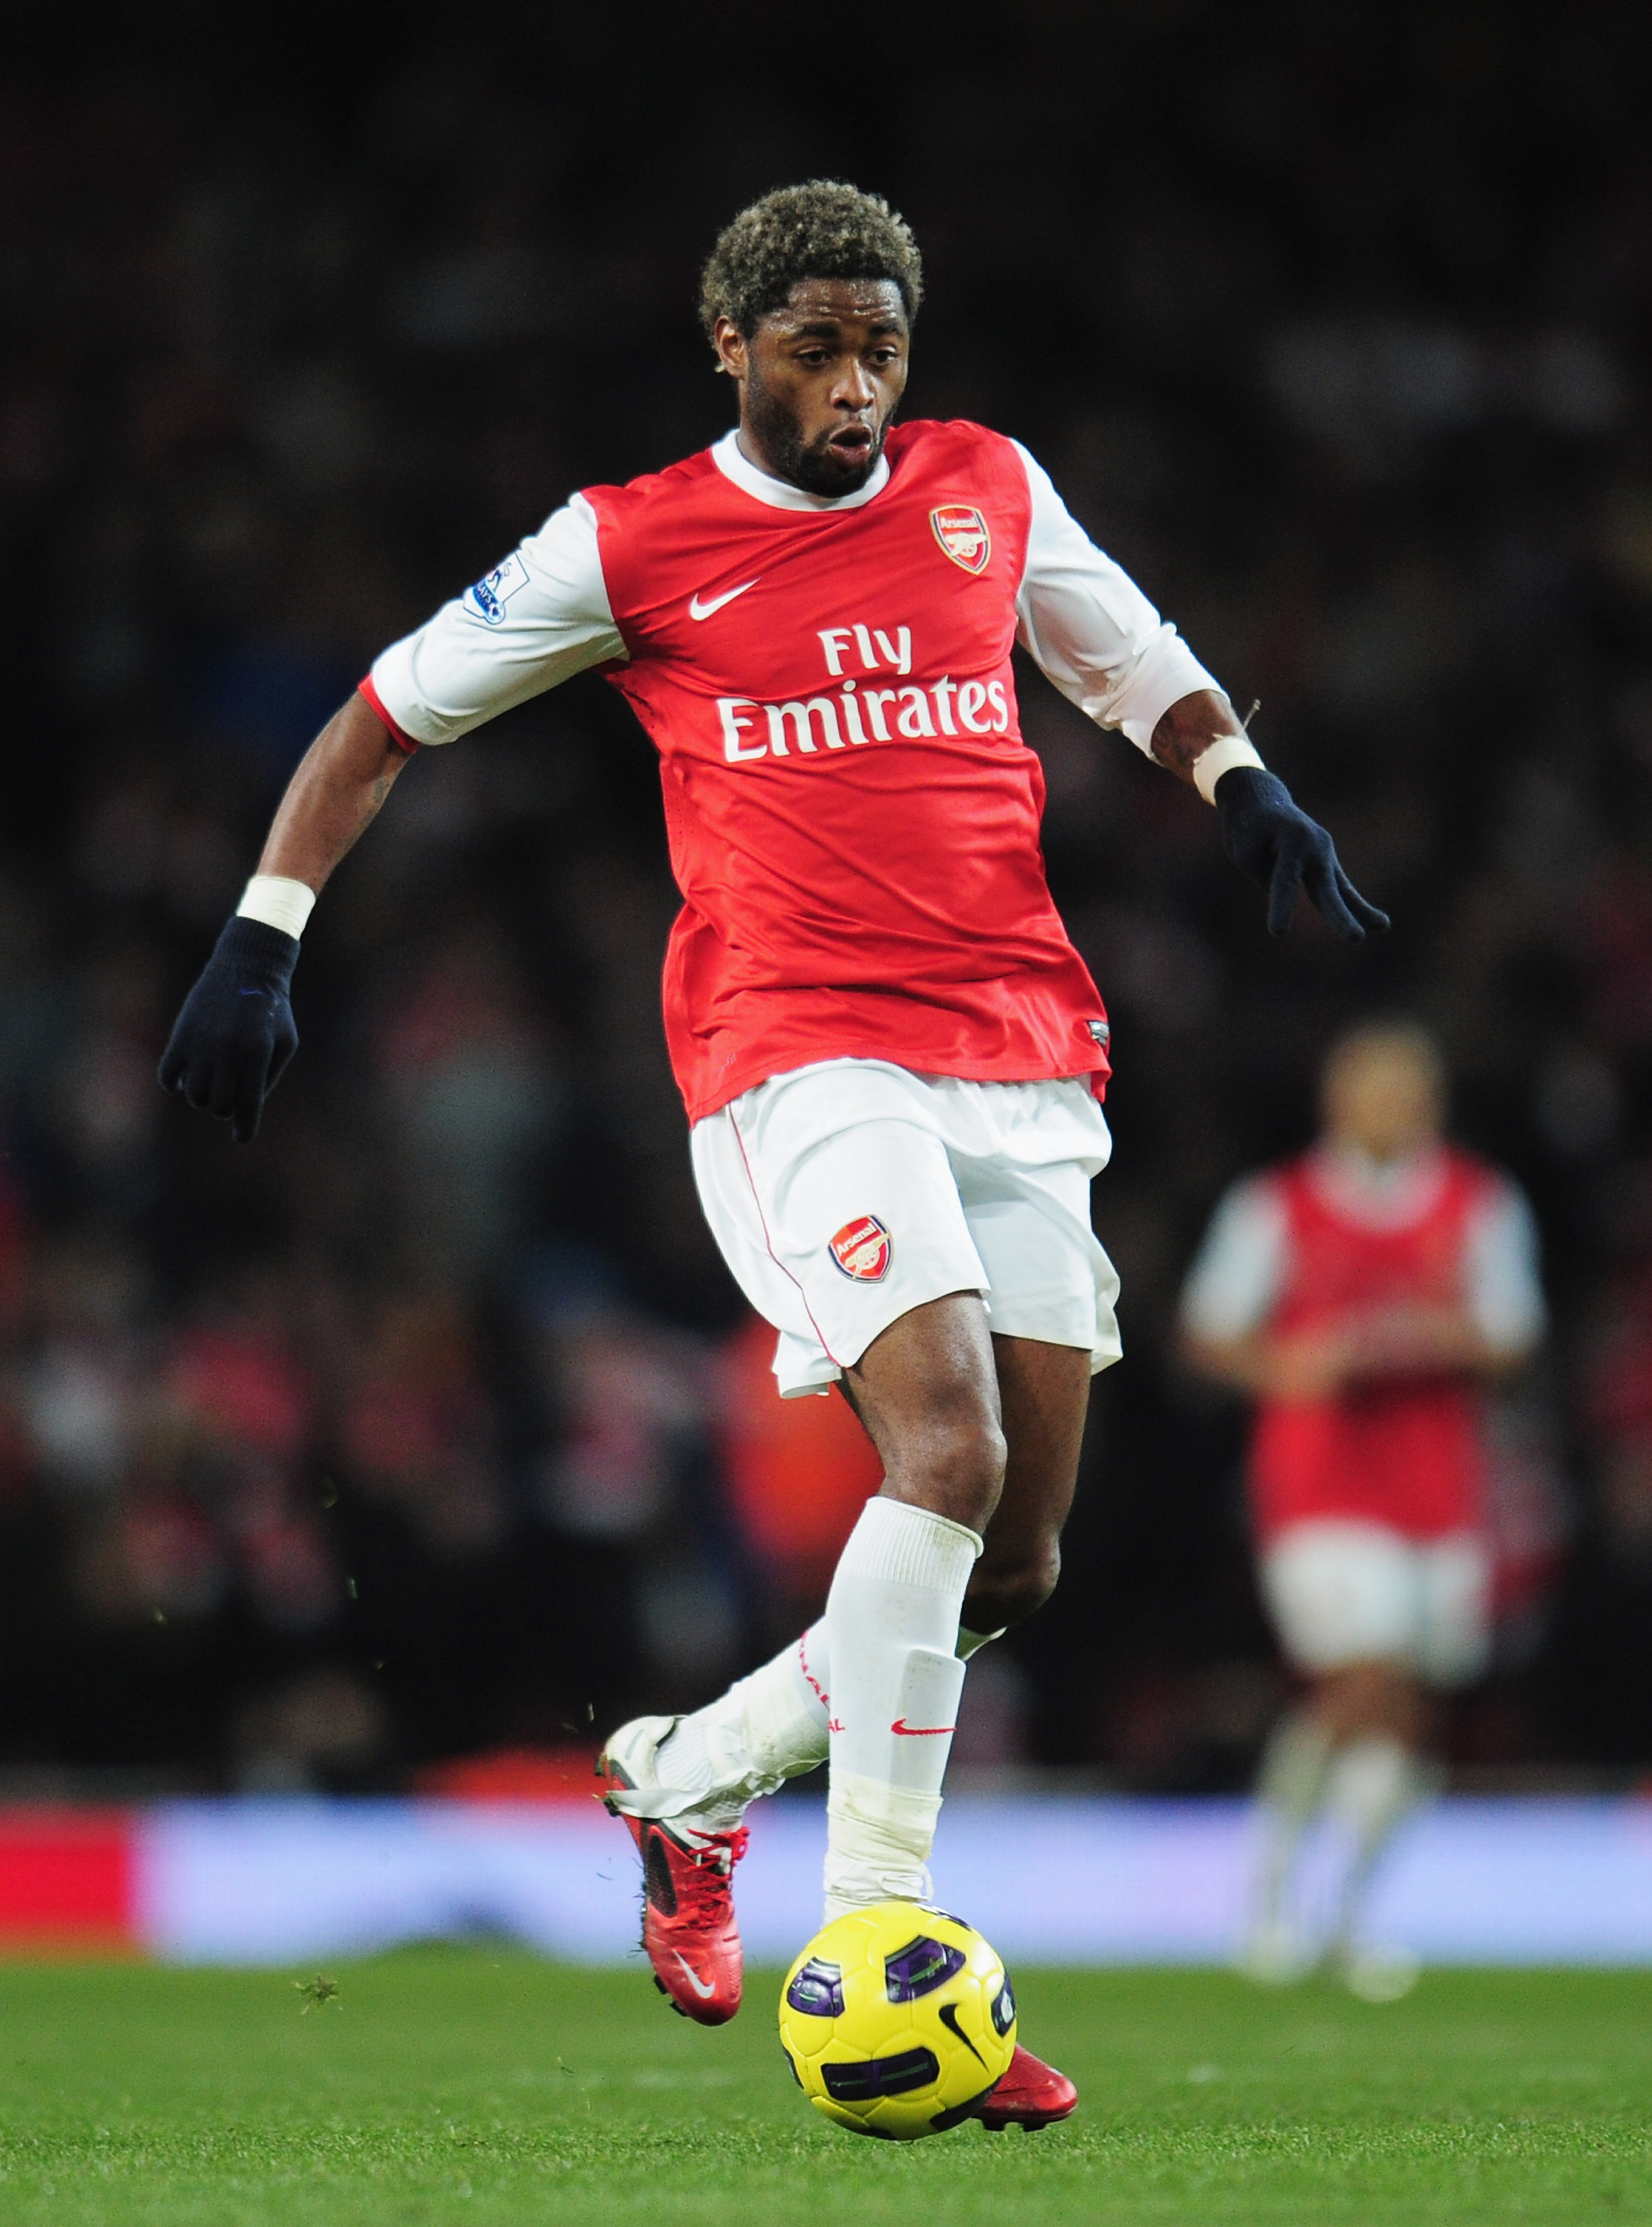 LONDON, ENGLAND - DECEMBER 27:  Alex Song of Arsenal in action during the Barclays Premier League match between Arsenal and Chelsea at the Emirates Stadium on December 27, 2010 in London, England.  (Photo by Shaun Botterill/Getty Images)